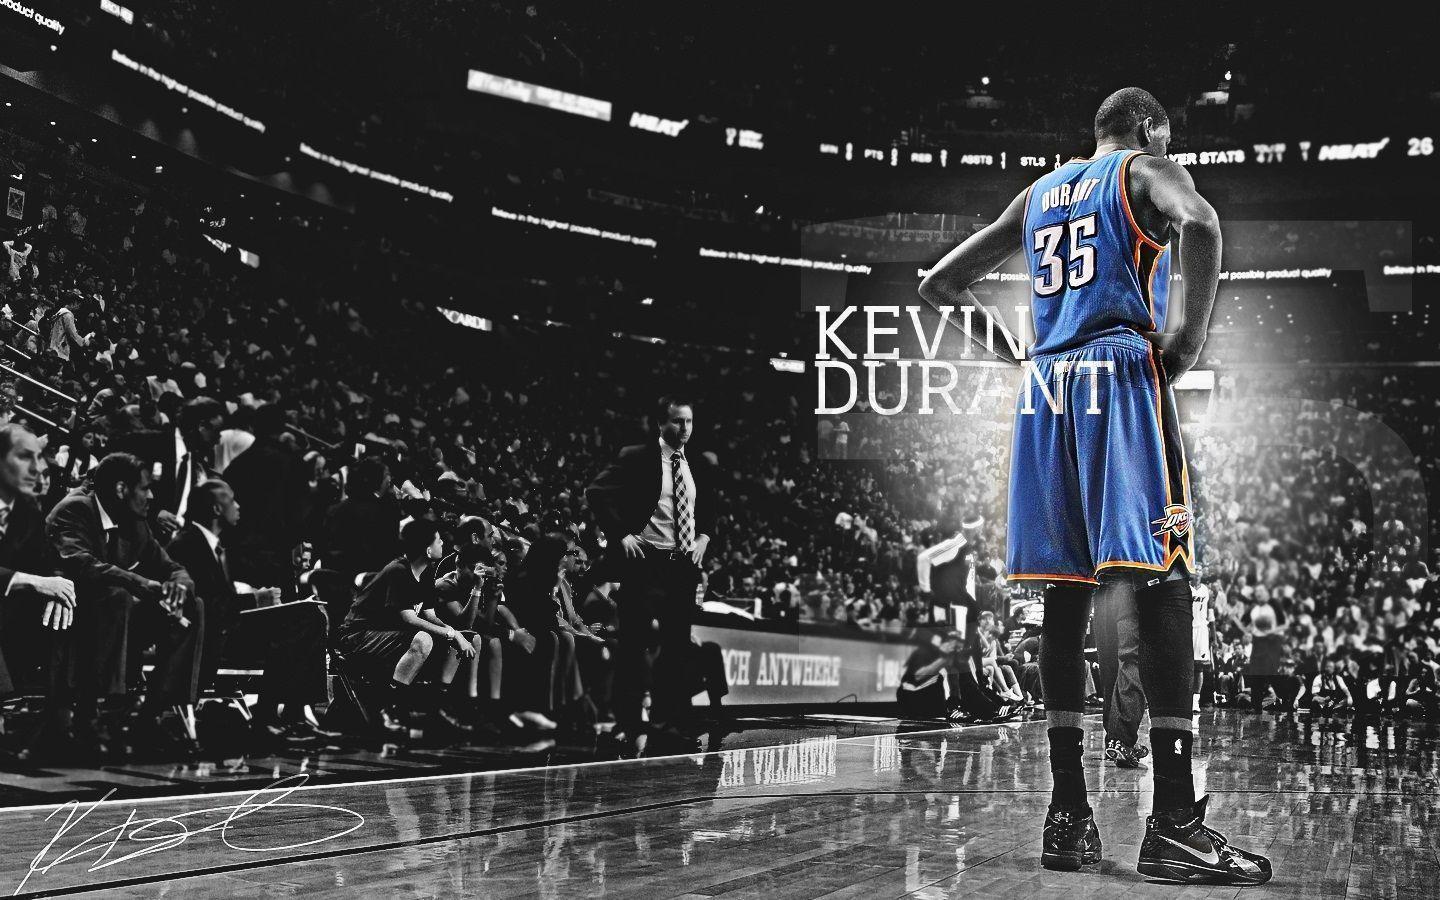 Kevin Durant Wallpaper For Android Wallpaper. Wallpaper